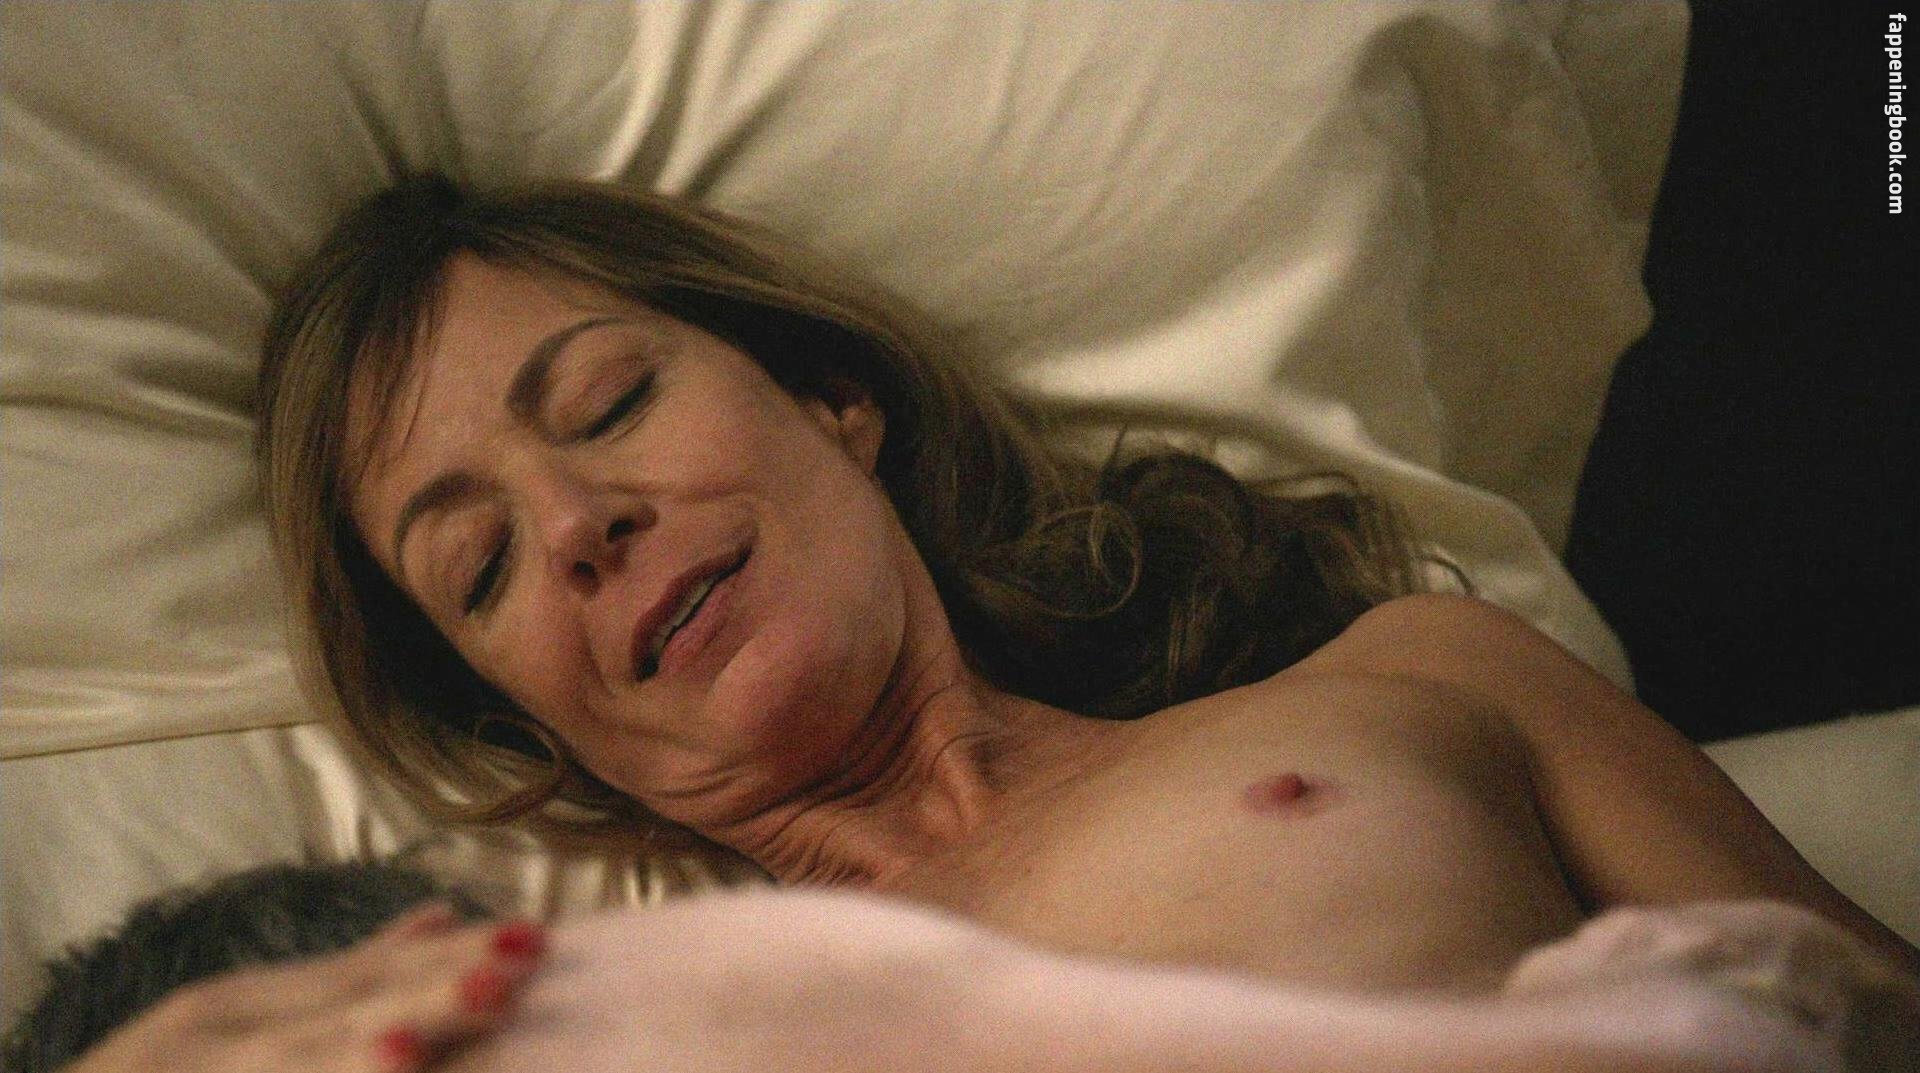 Allison Janney Nude, The Fappening - Photo #21302 - FappeningBook.